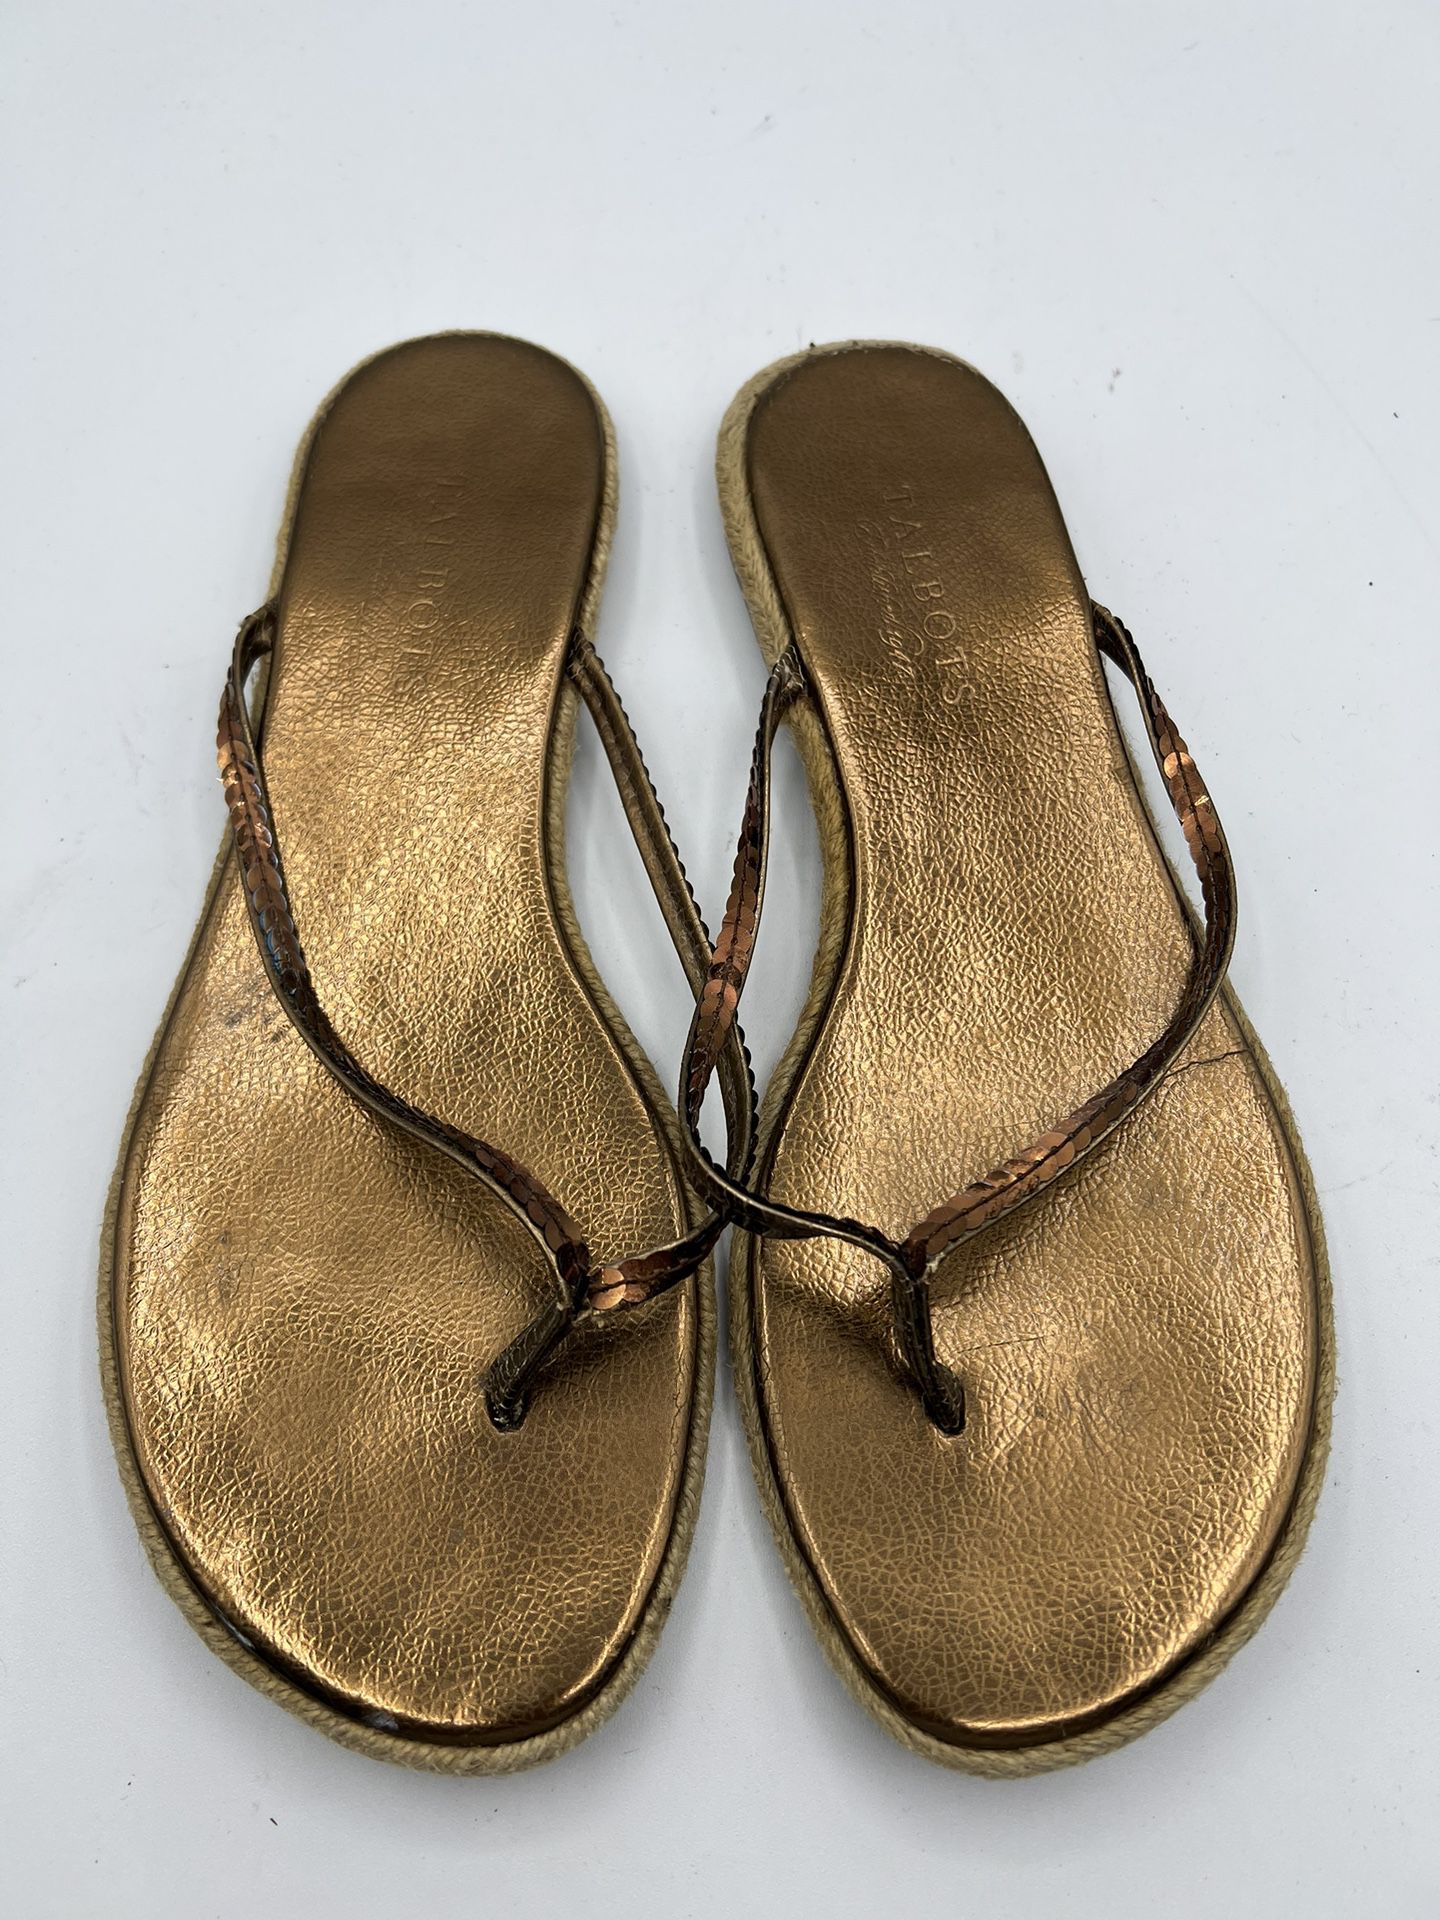 Talbots- Copper Sequence Flip Flops w/ Jute Bottom Sequence Summer Shopping.  Great condition size 8.5 B42 